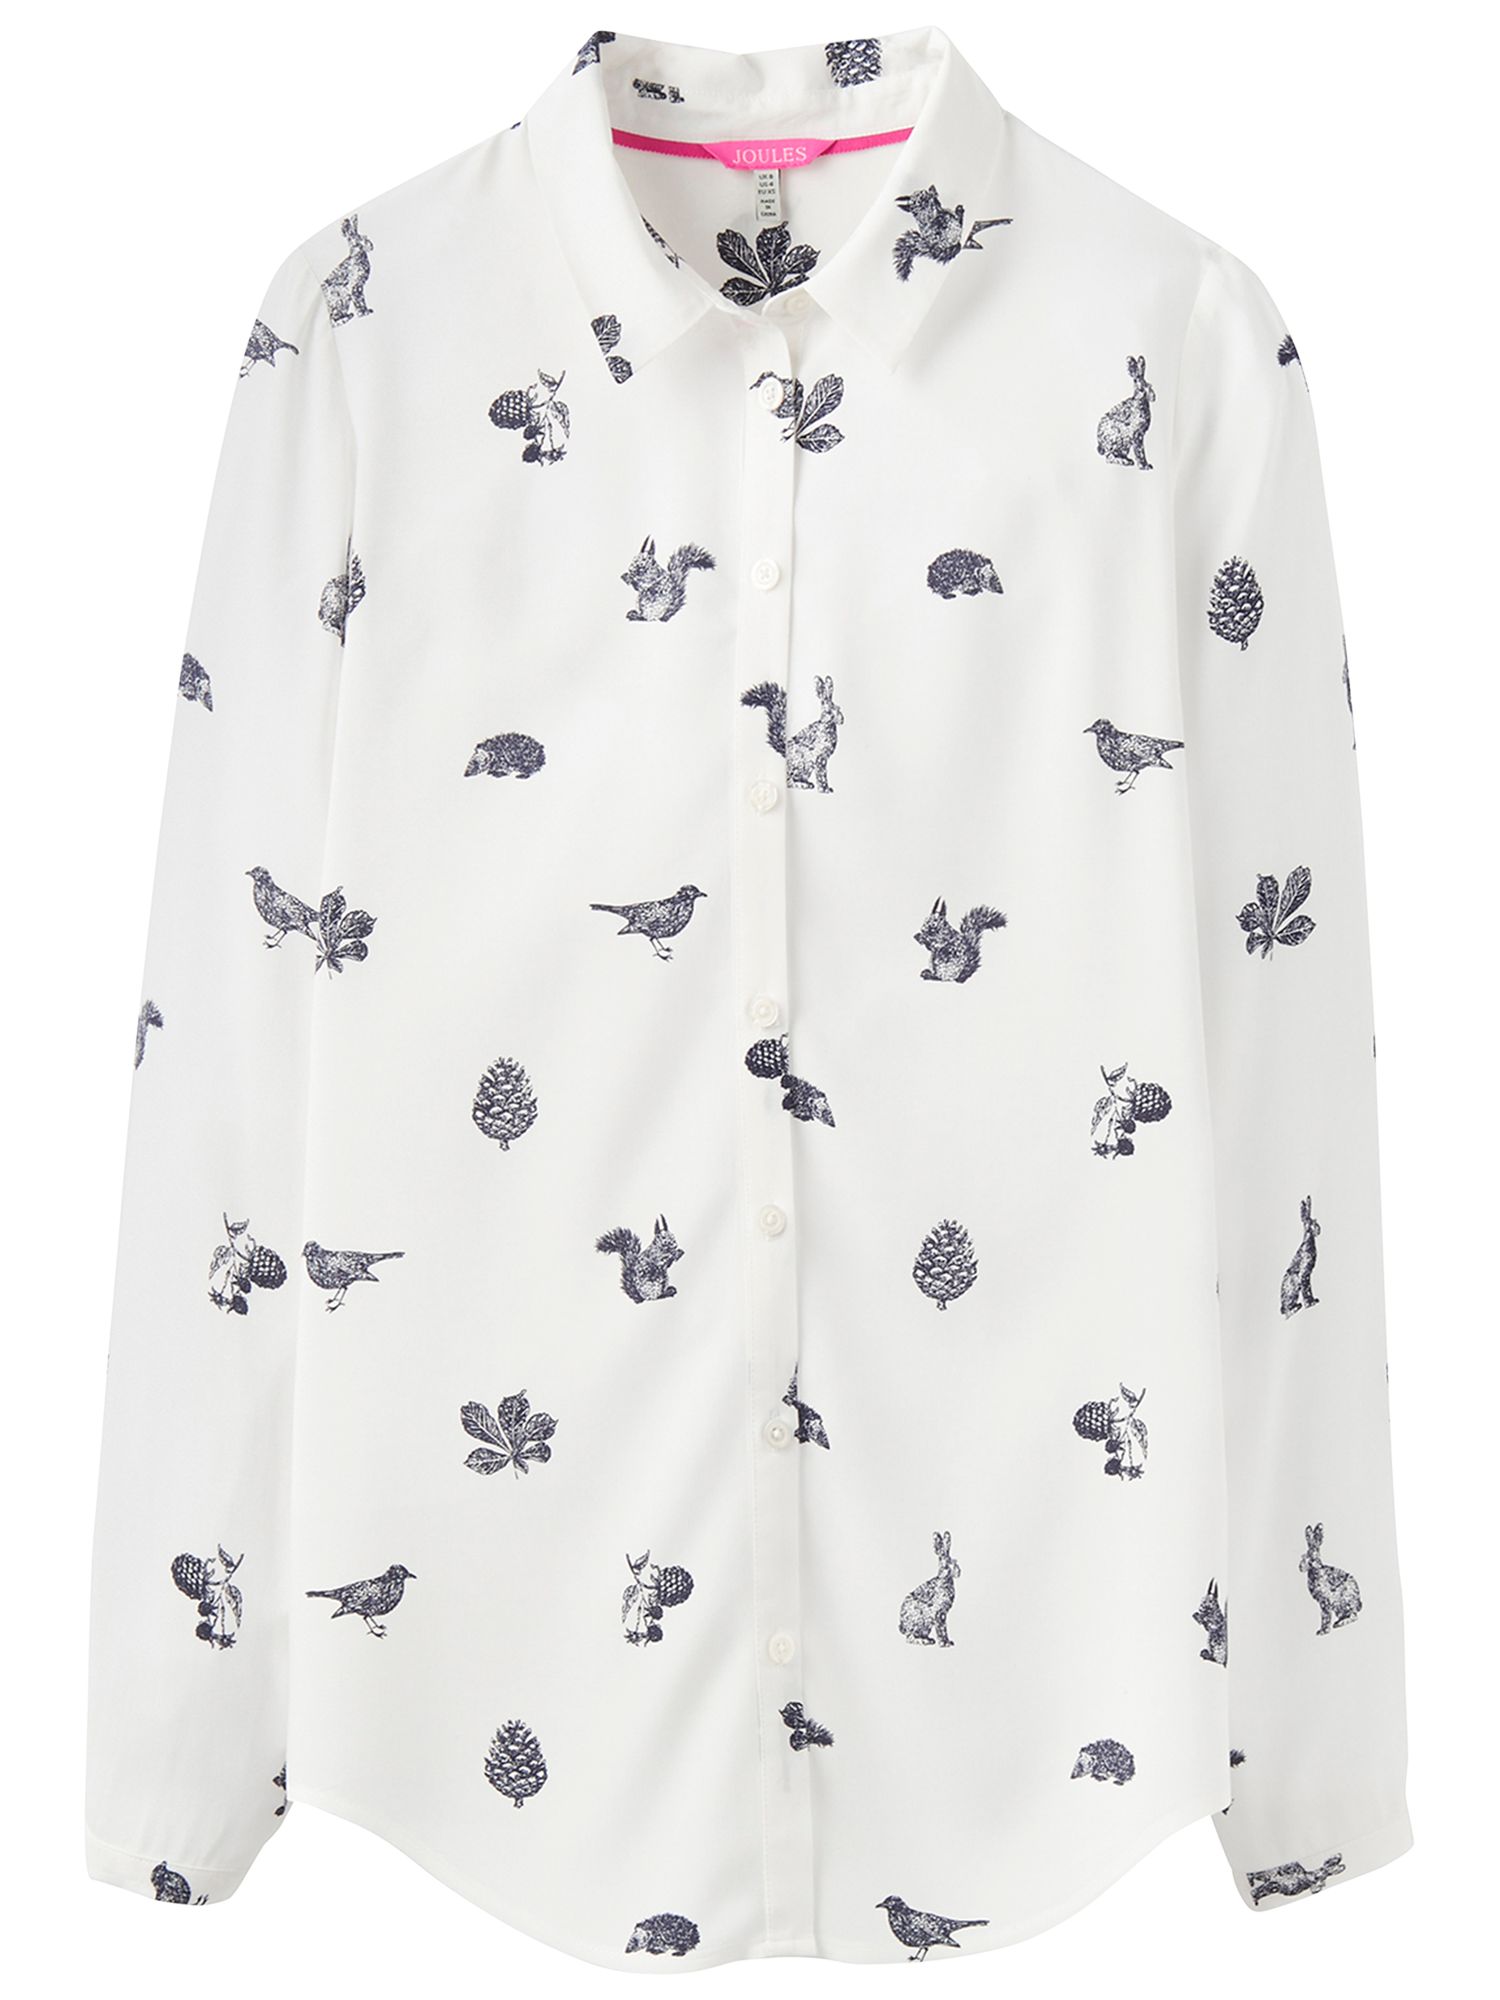 Joules Elvina Etched Animal Print Shirt, Cream